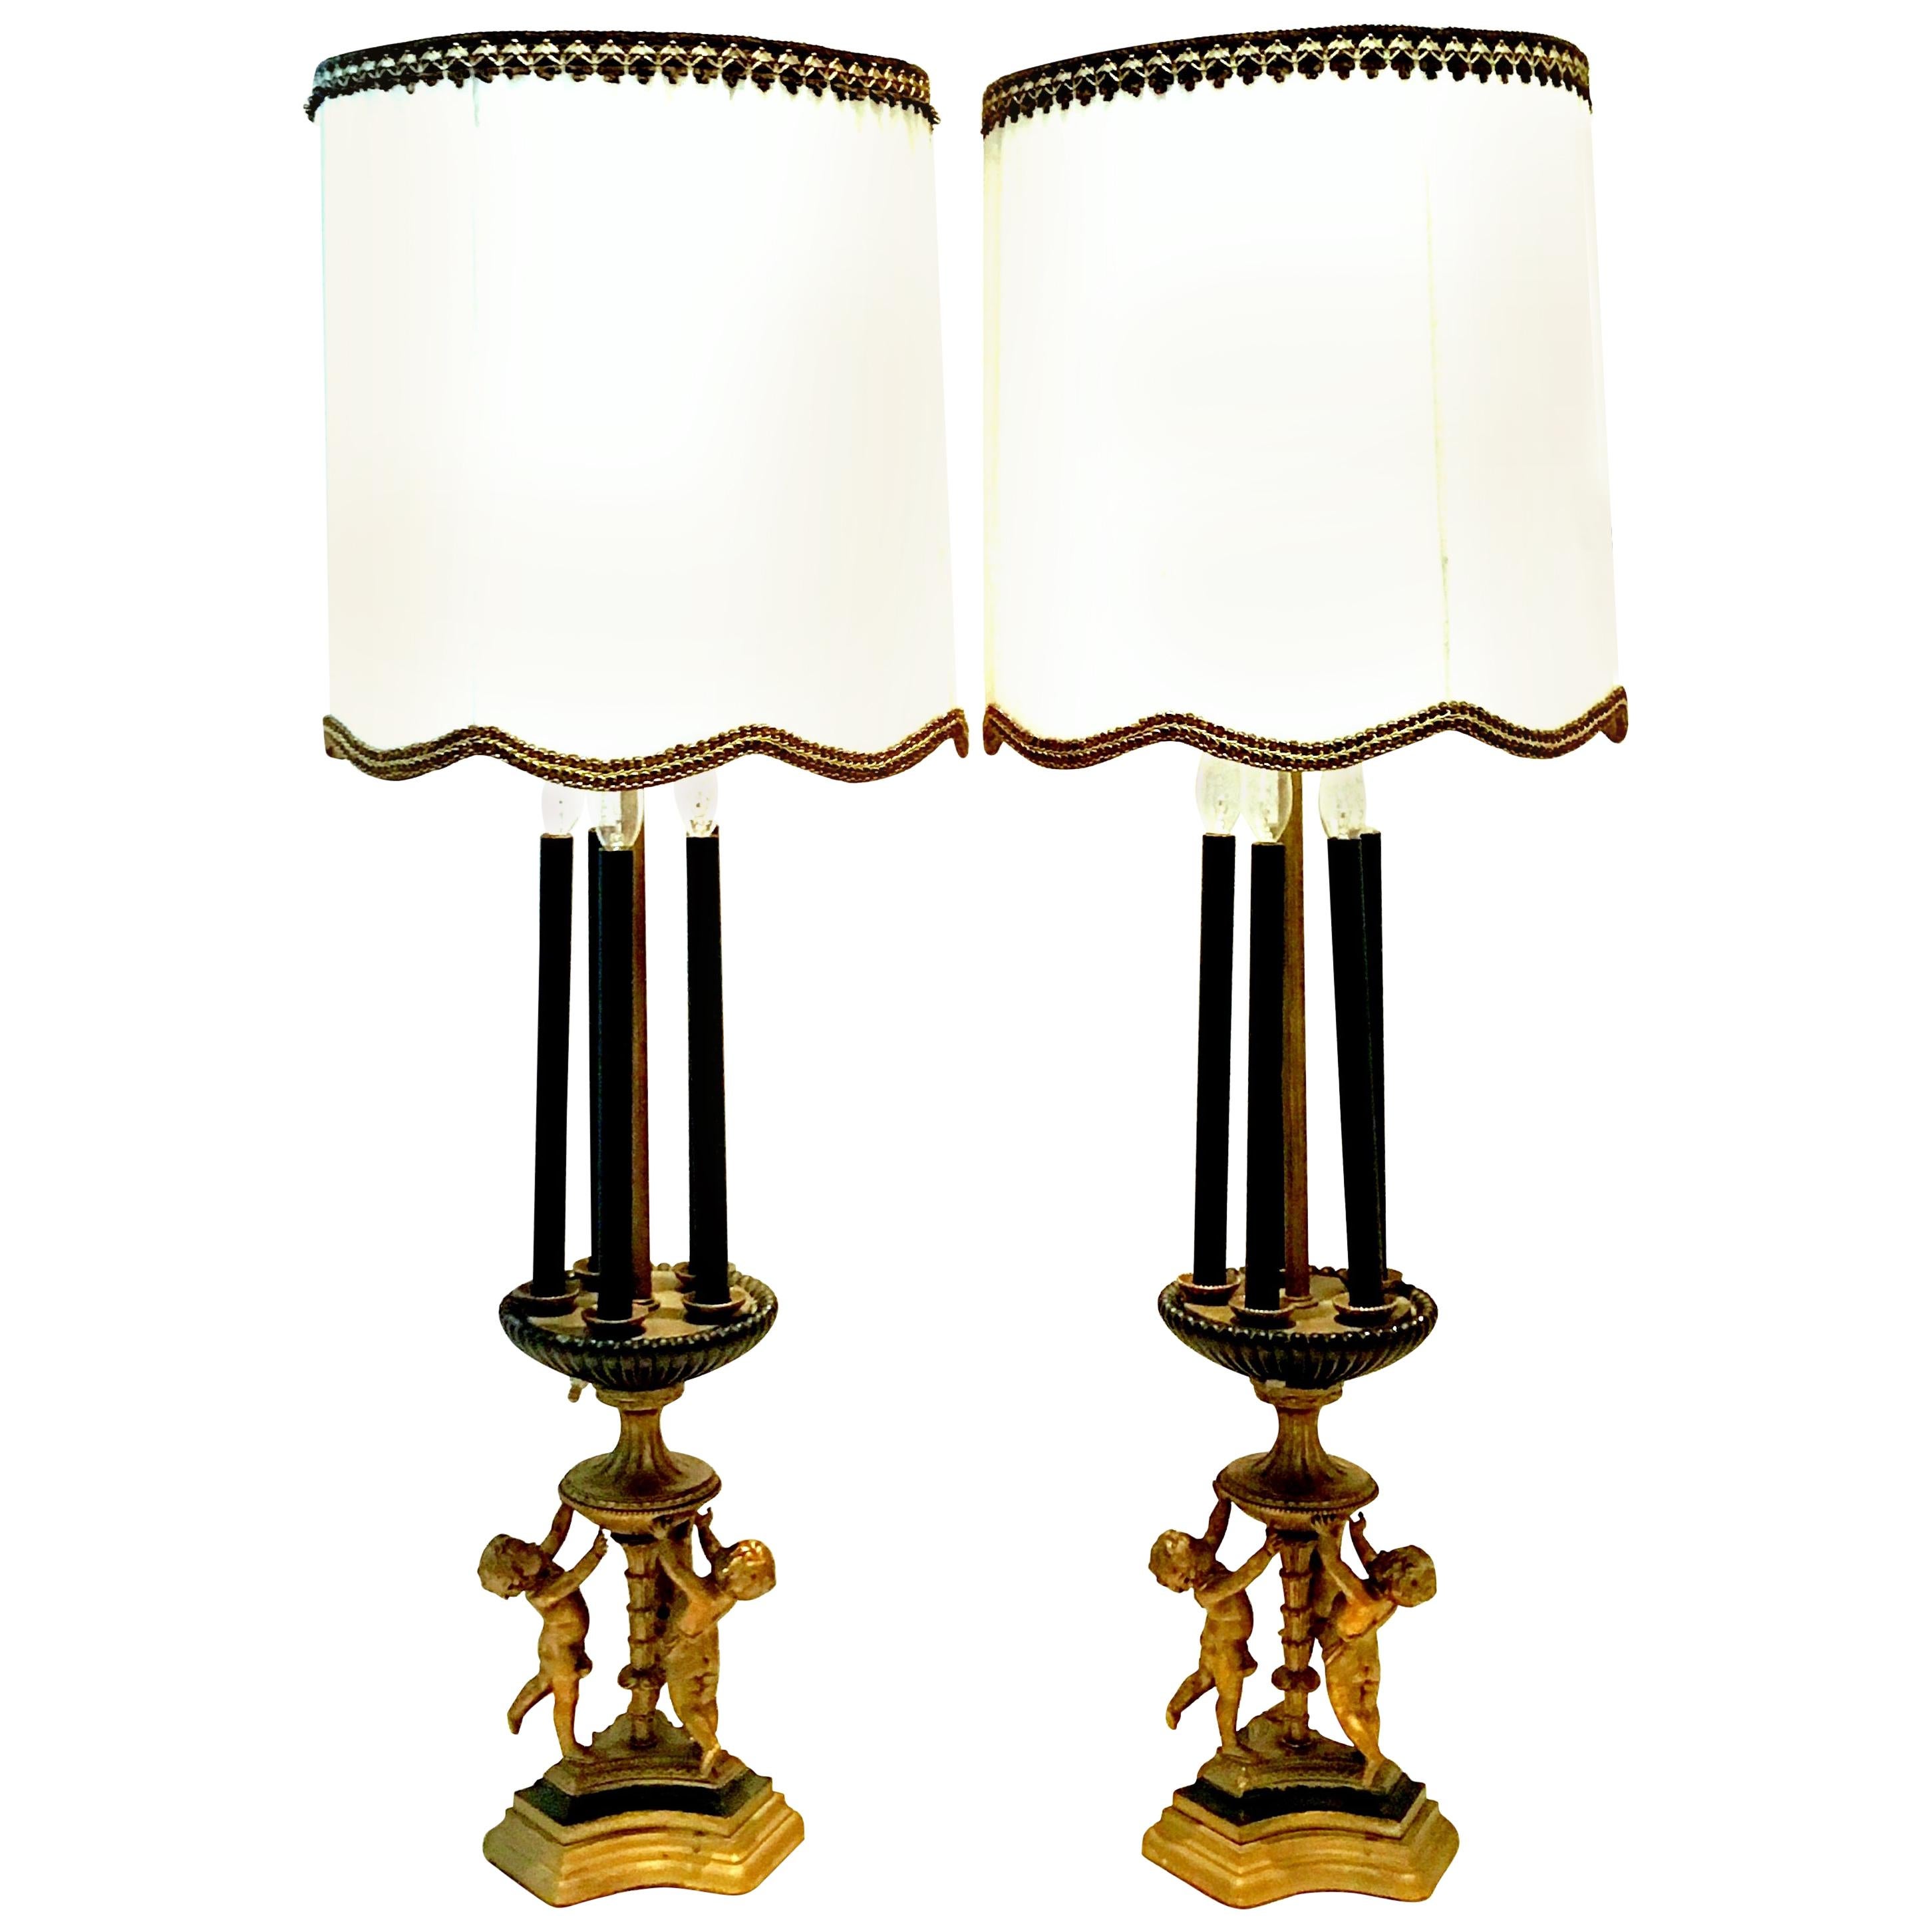 Antique Monumental Pair Of Neoclassical Six-Light Candelabra Lamps & Shades For Sale